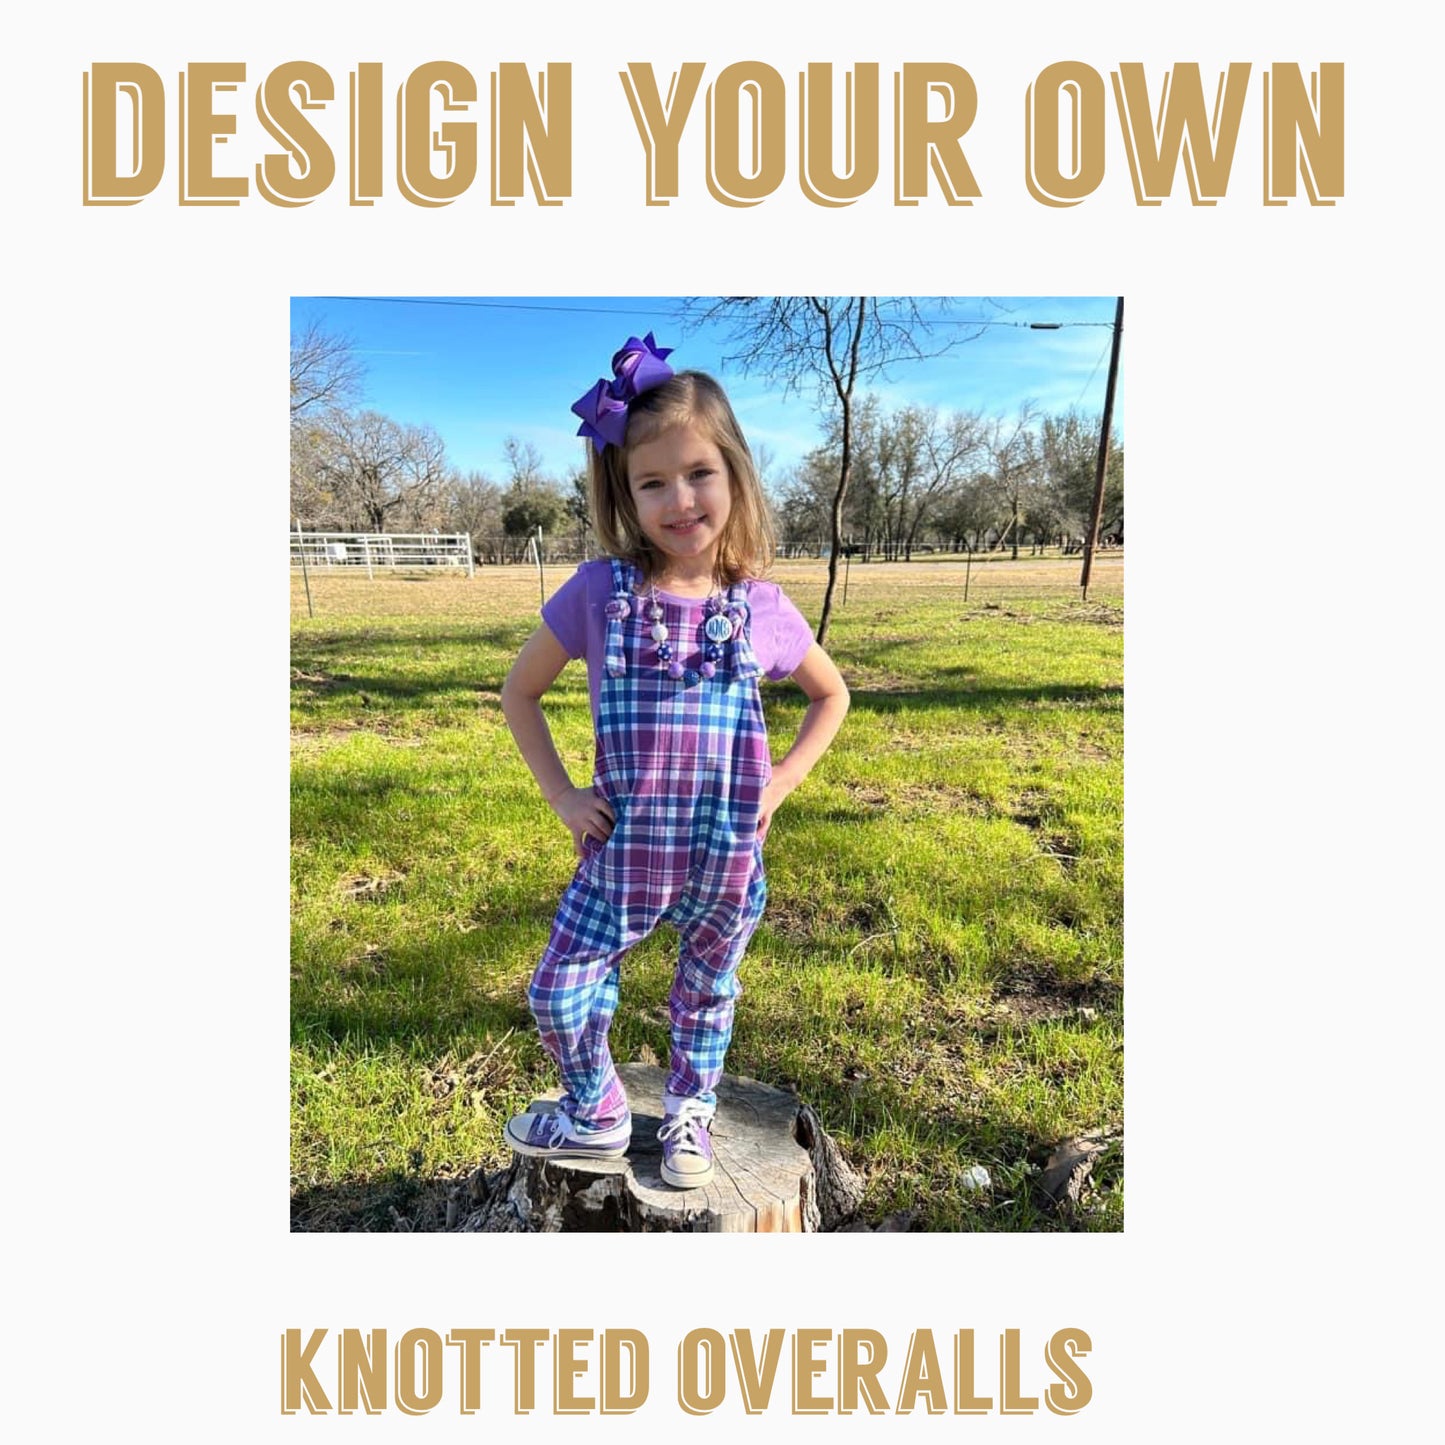 Design Your Own | Knotted overalls